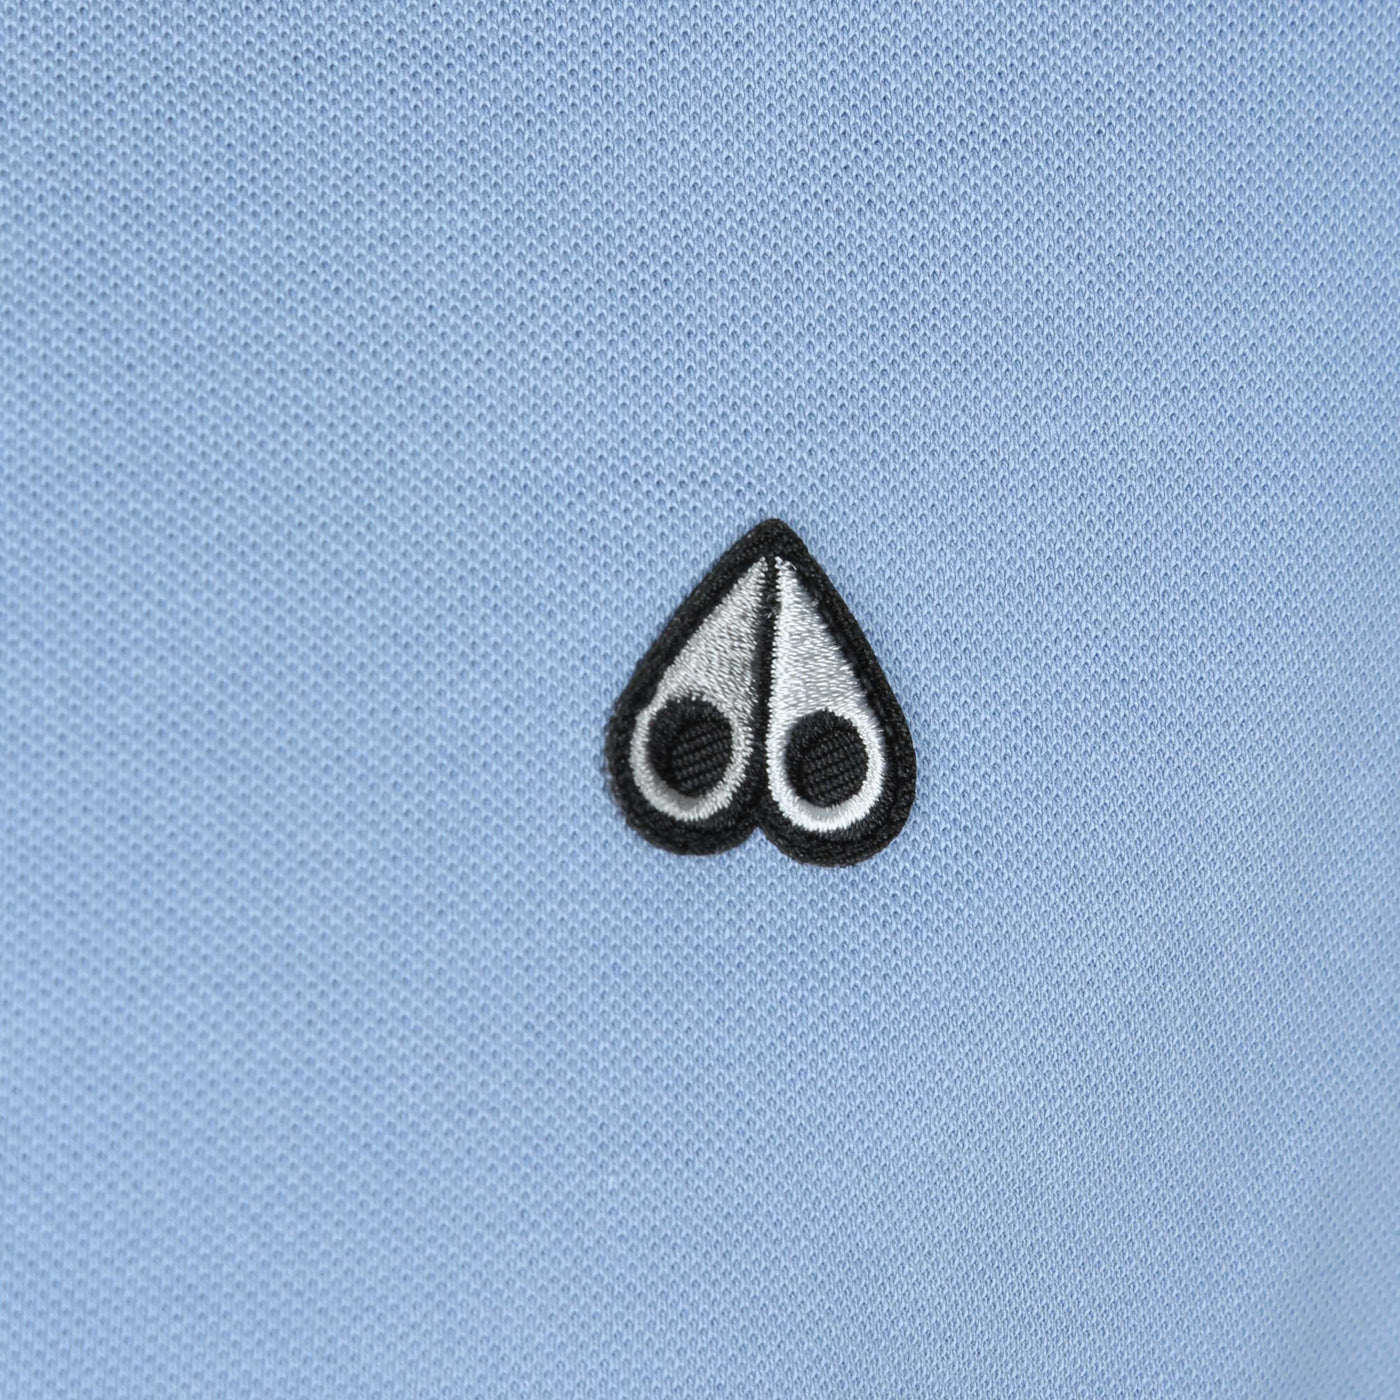 Moose Knuckles Pique Polo Shirt in Windy Blue